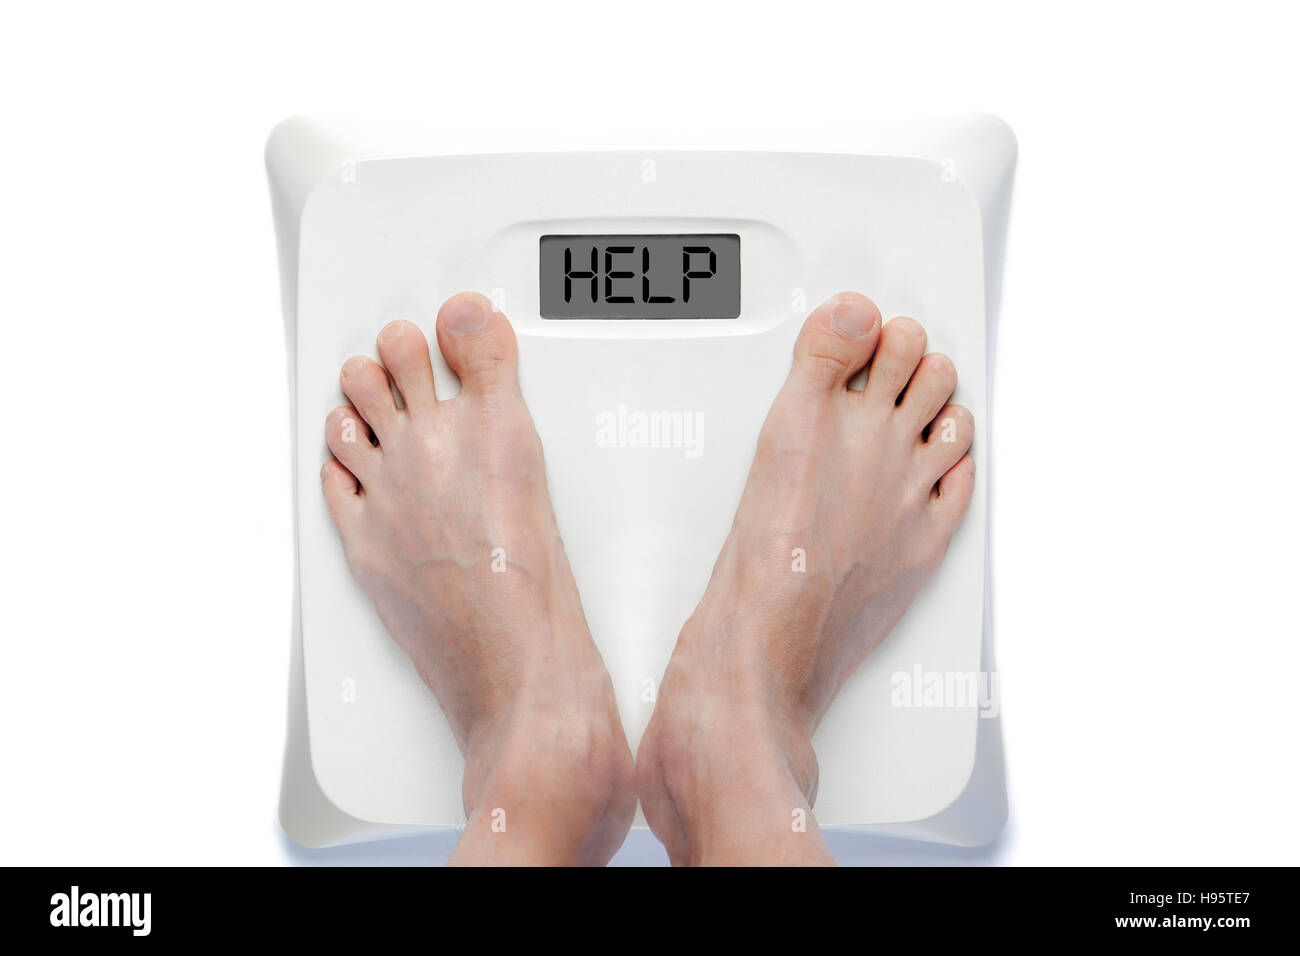 Feet on bathroom scale with the word HELP on screen. Signifies either overweight or underweight health problems. Stock Photo